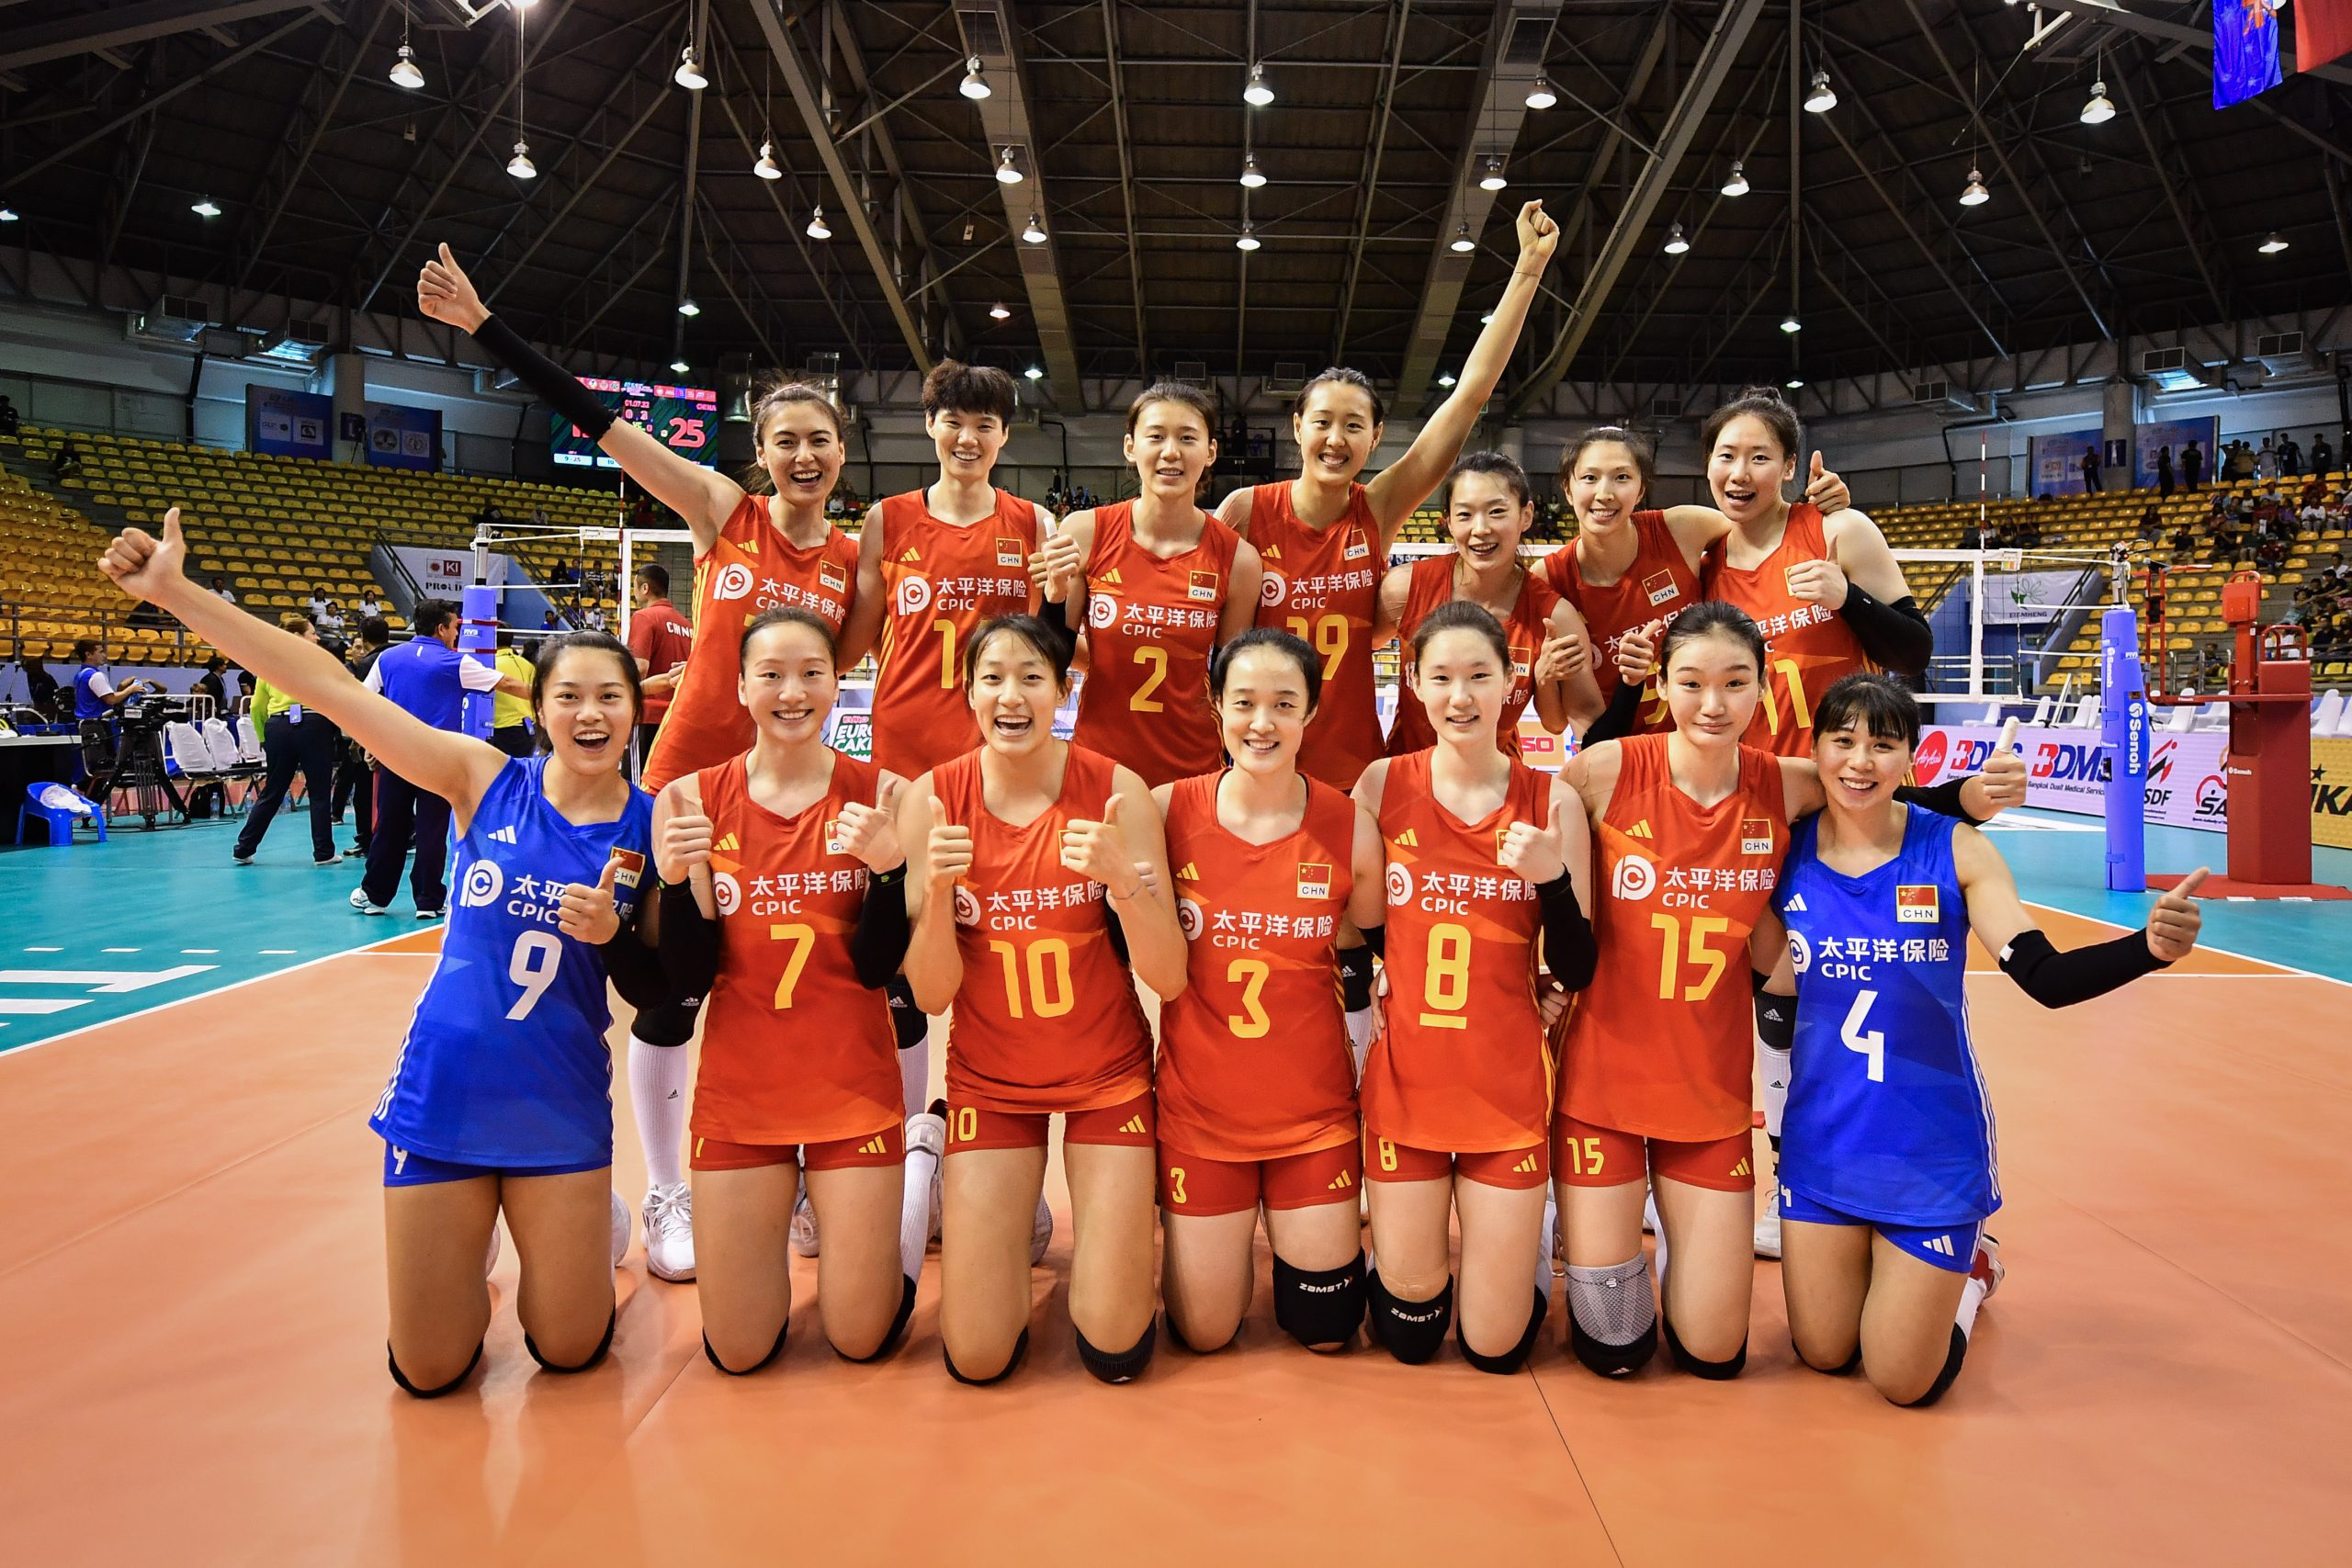 CHINA STORM PAST INDIA FOR LOPSIDED WIN AT 22ND ASIAN SENIOR WOMENS CHAMPIONSHIP